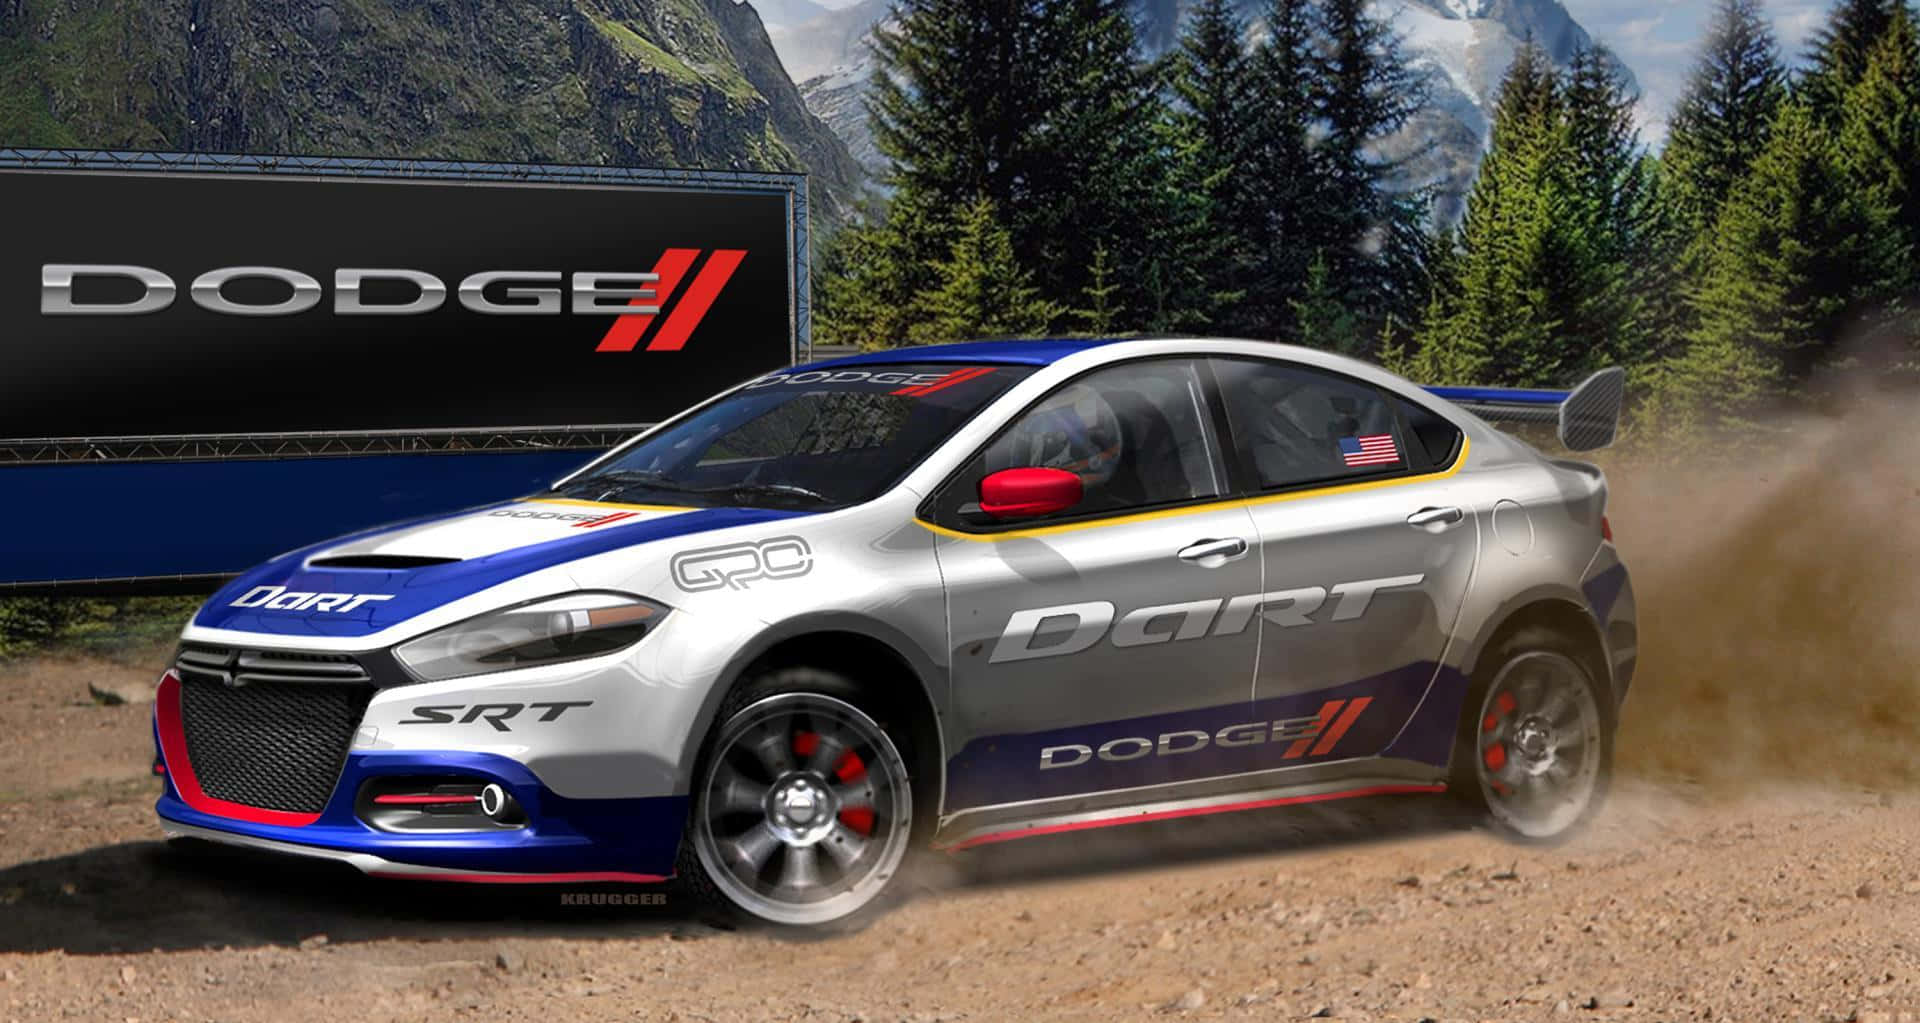 Sleek And Powerful Dodge Dart In Action Wallpaper